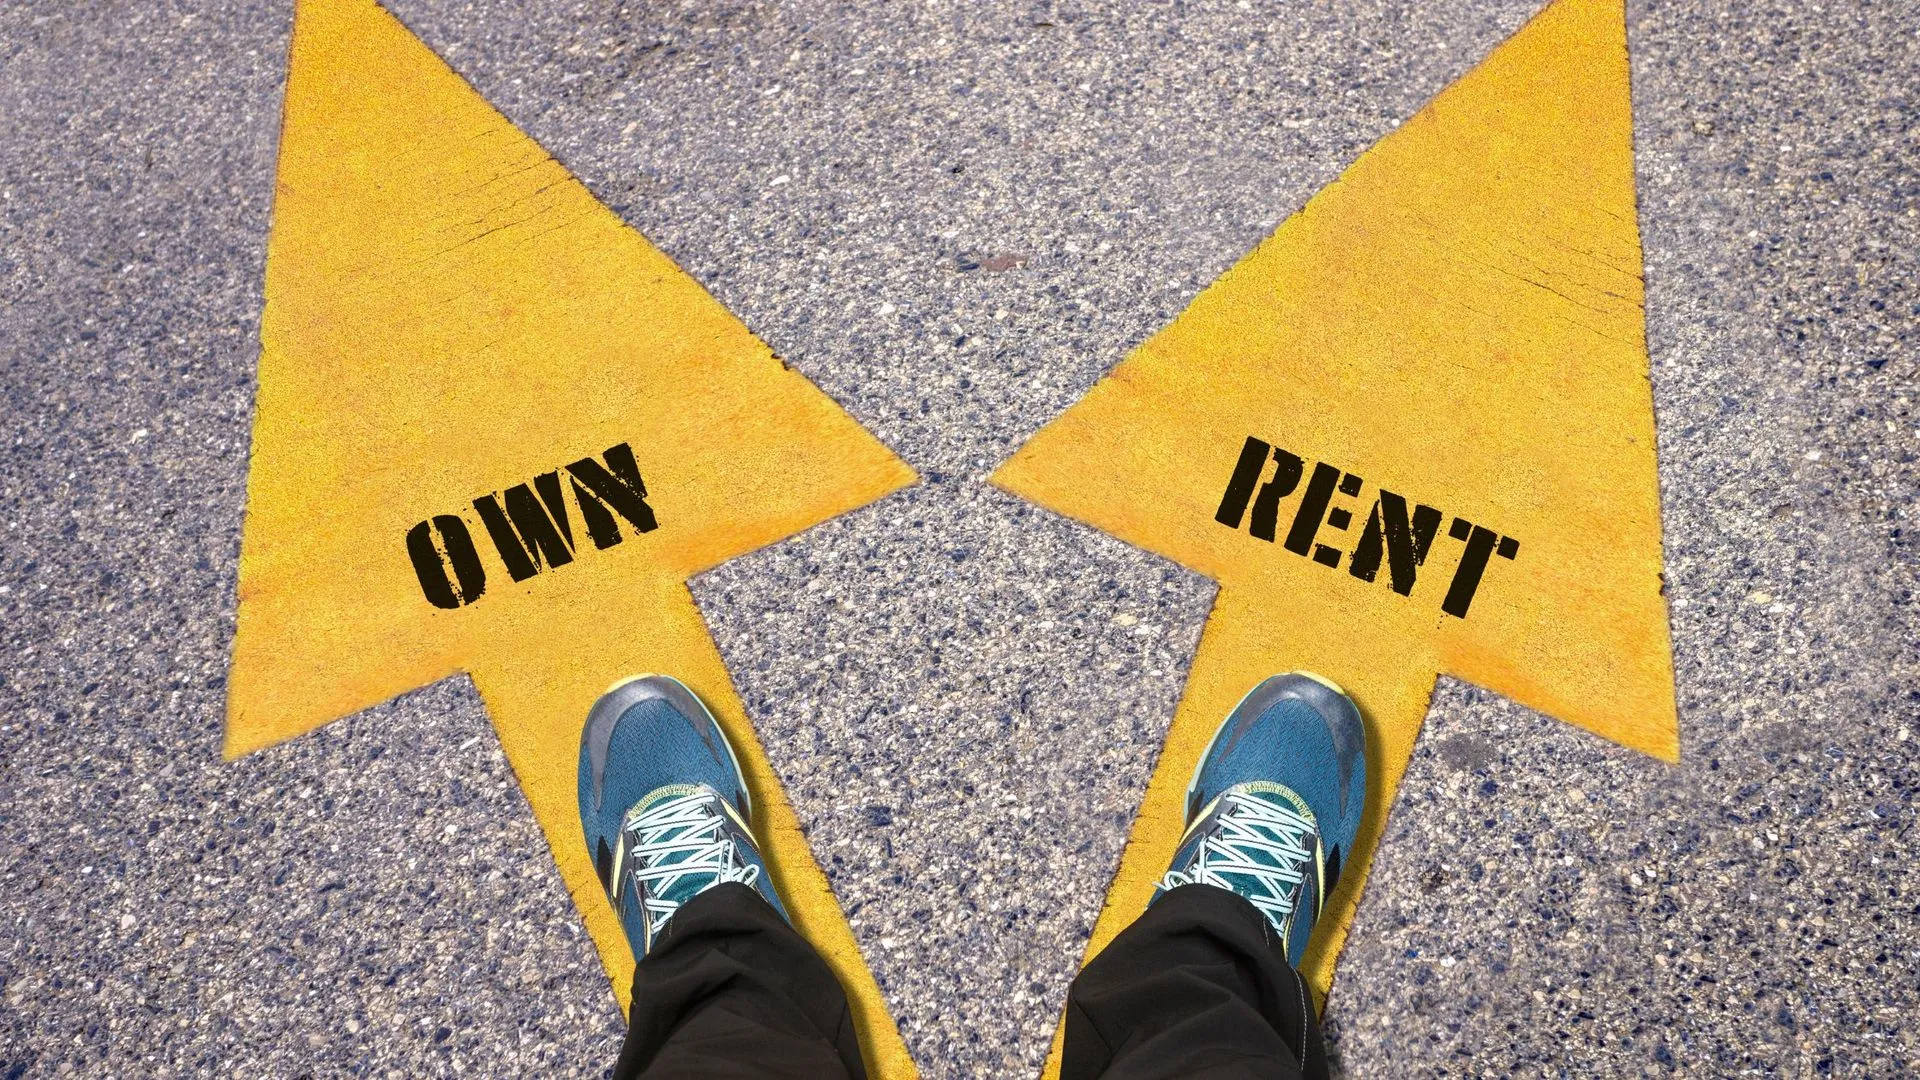 Renting vs. Buying a Home: Making the Right Choice